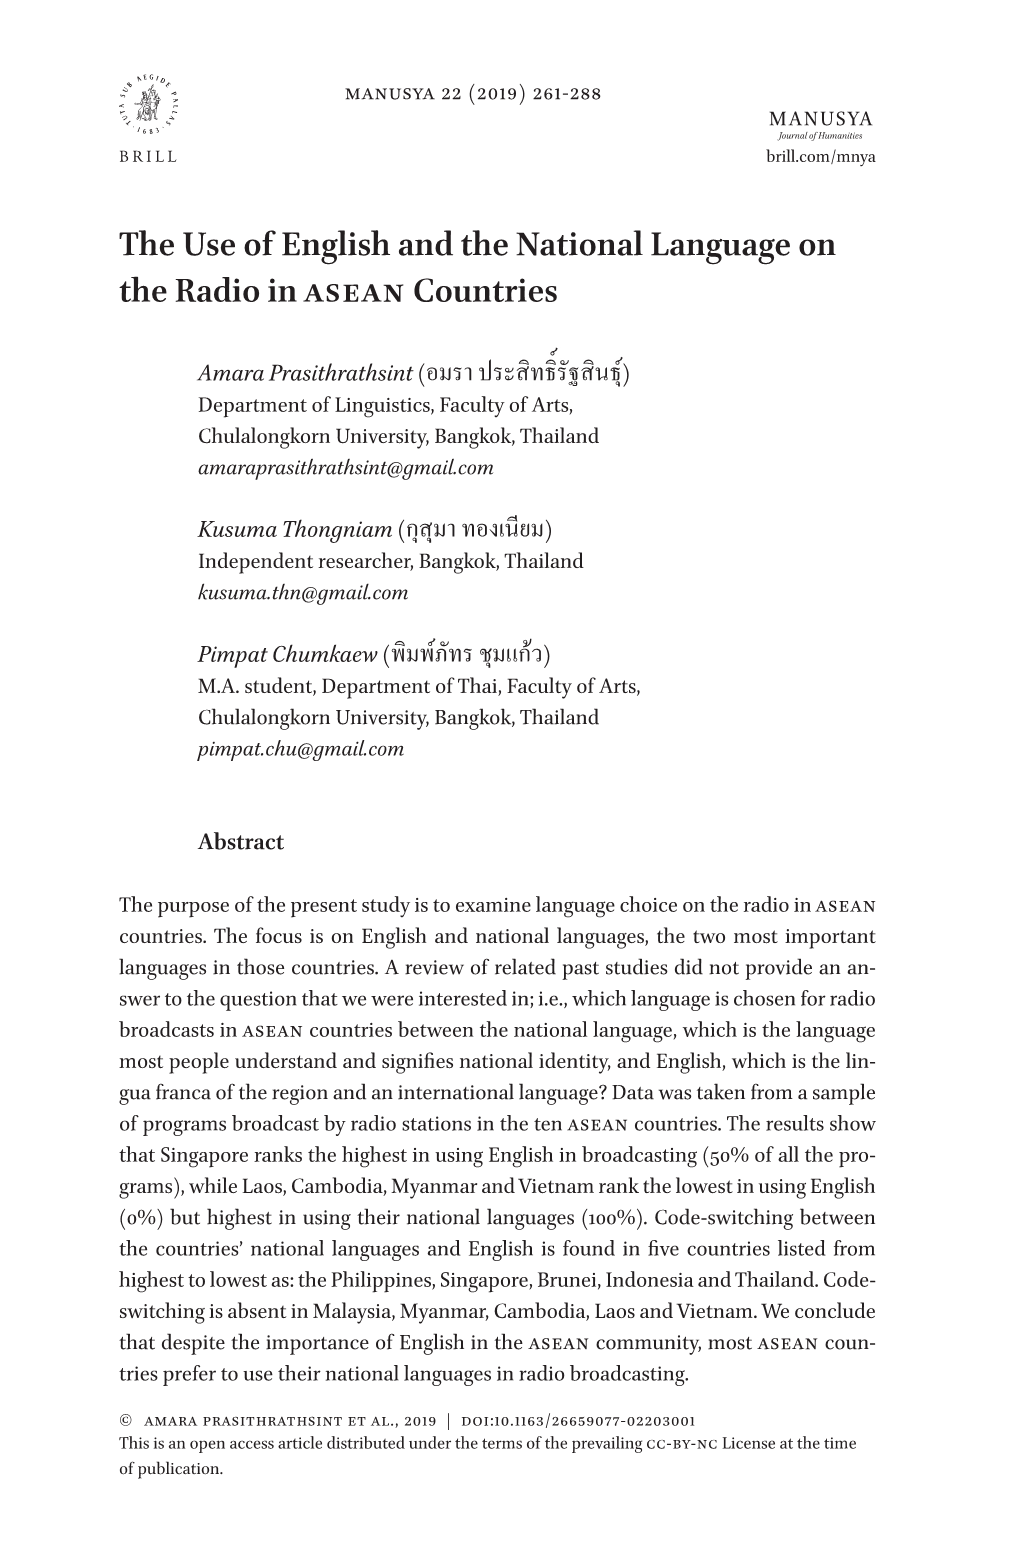 The Use of English and the National Language on the Radio in Asean Countries